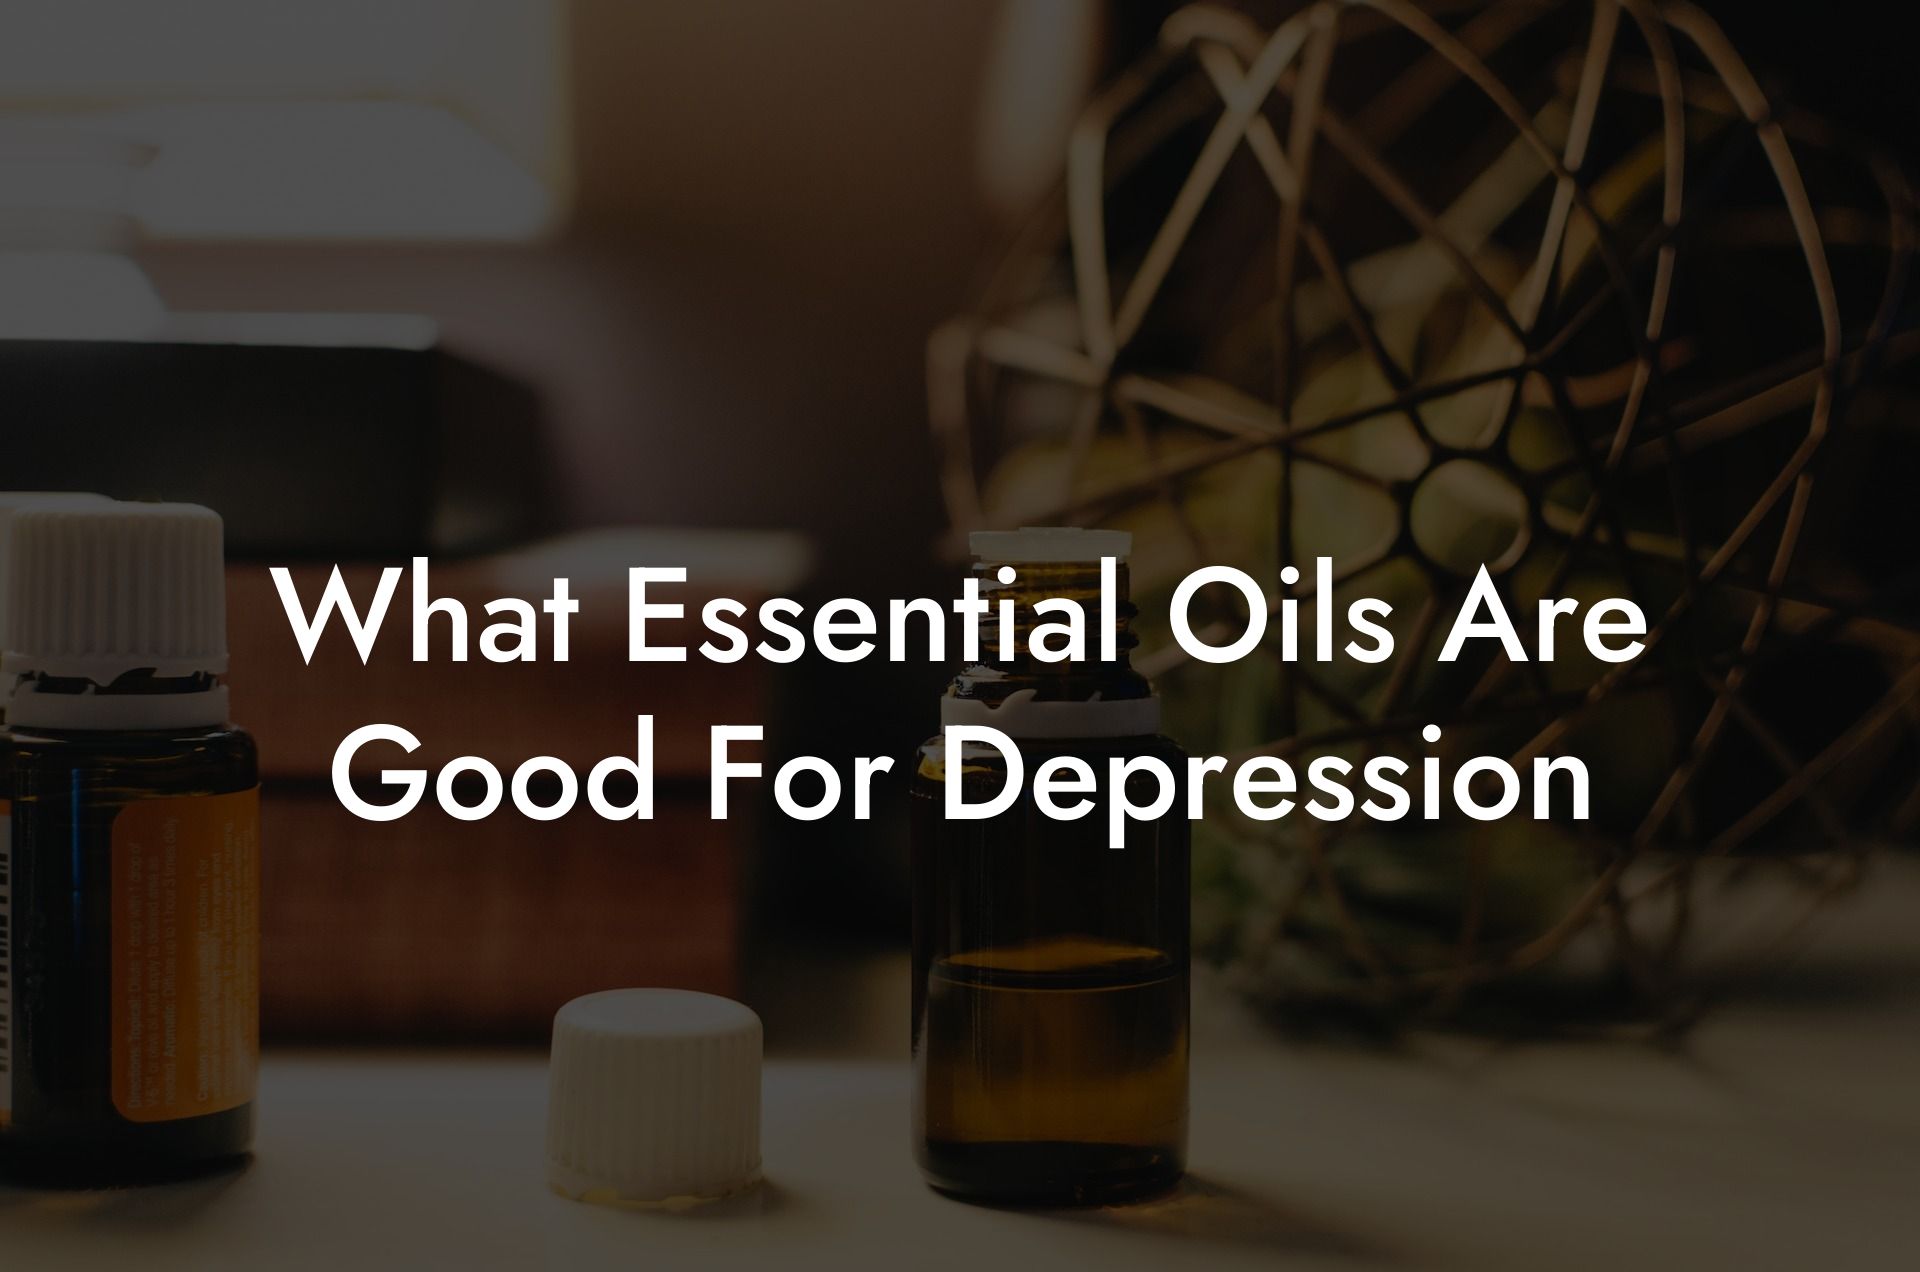 What Essential Oils Are Good For Depression